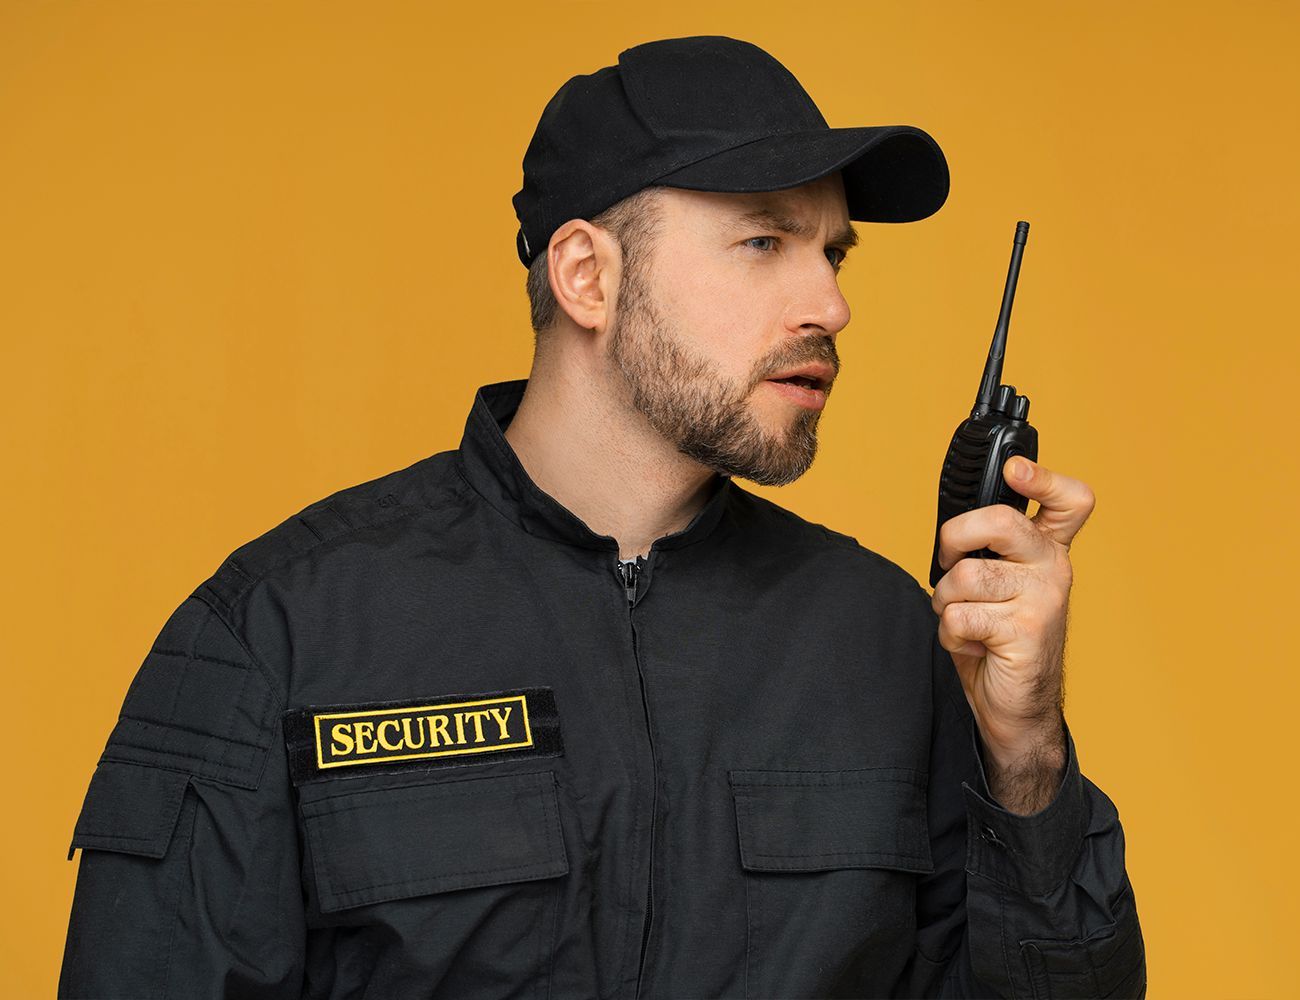 private security service in the UK